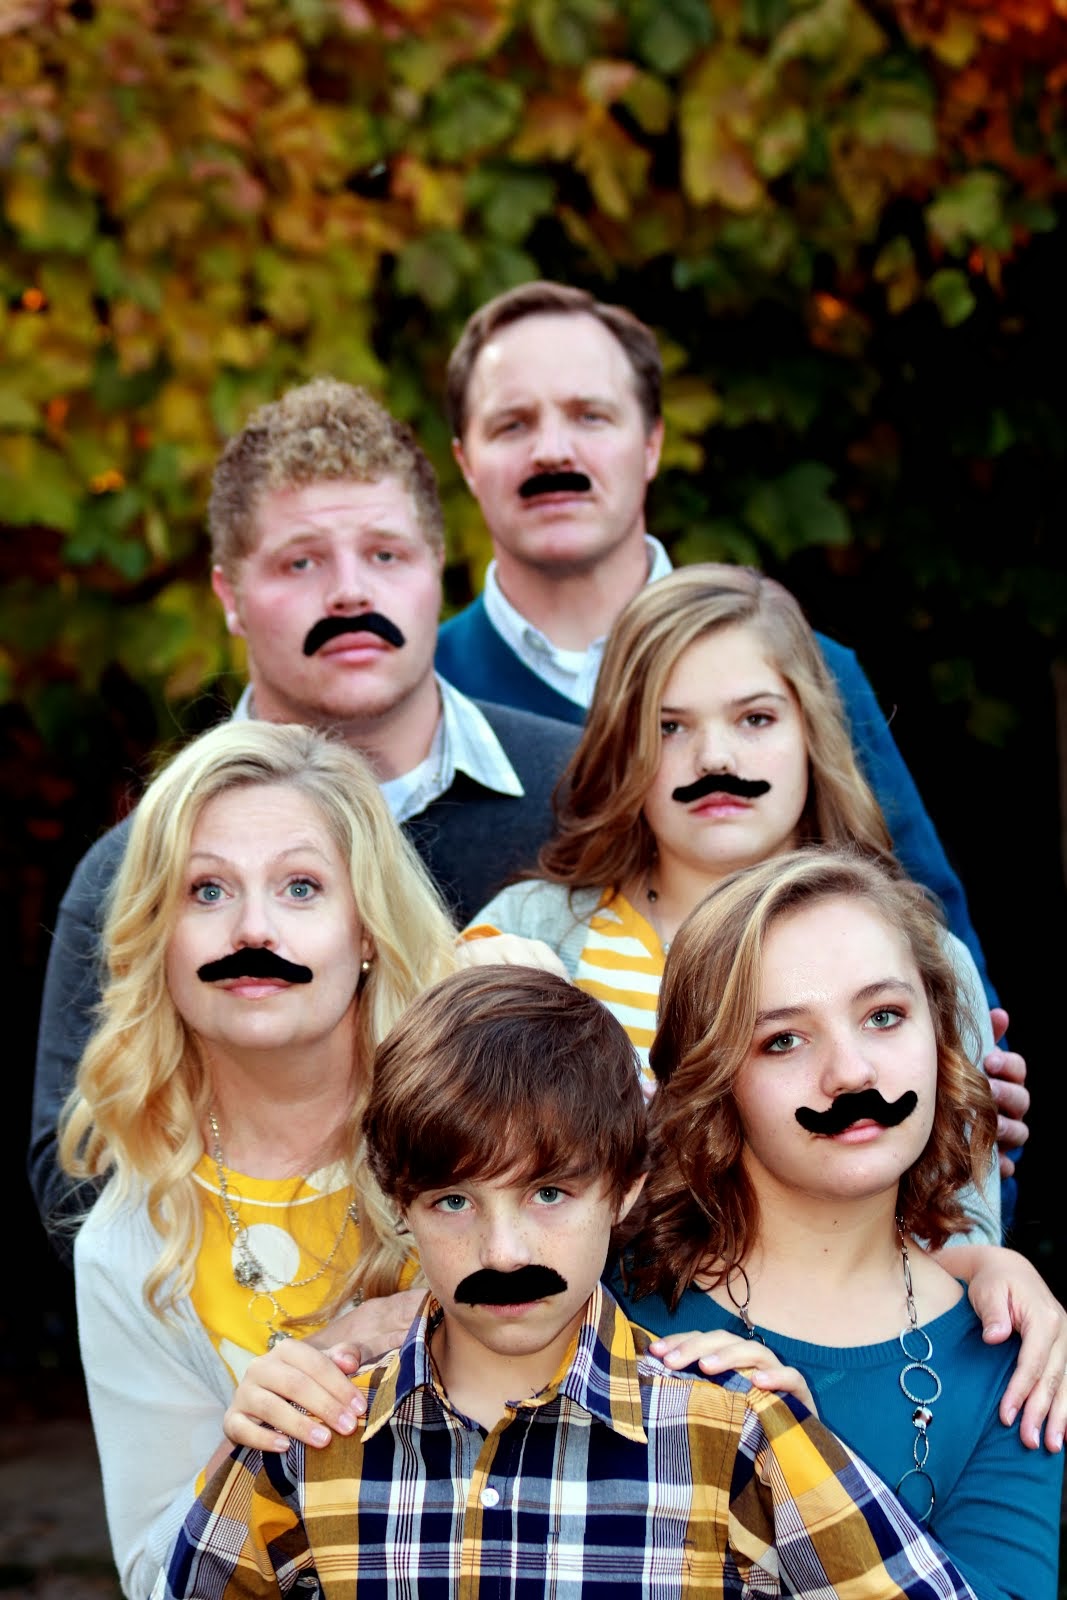 I mustache you a question- dId you know your family can be together after death?